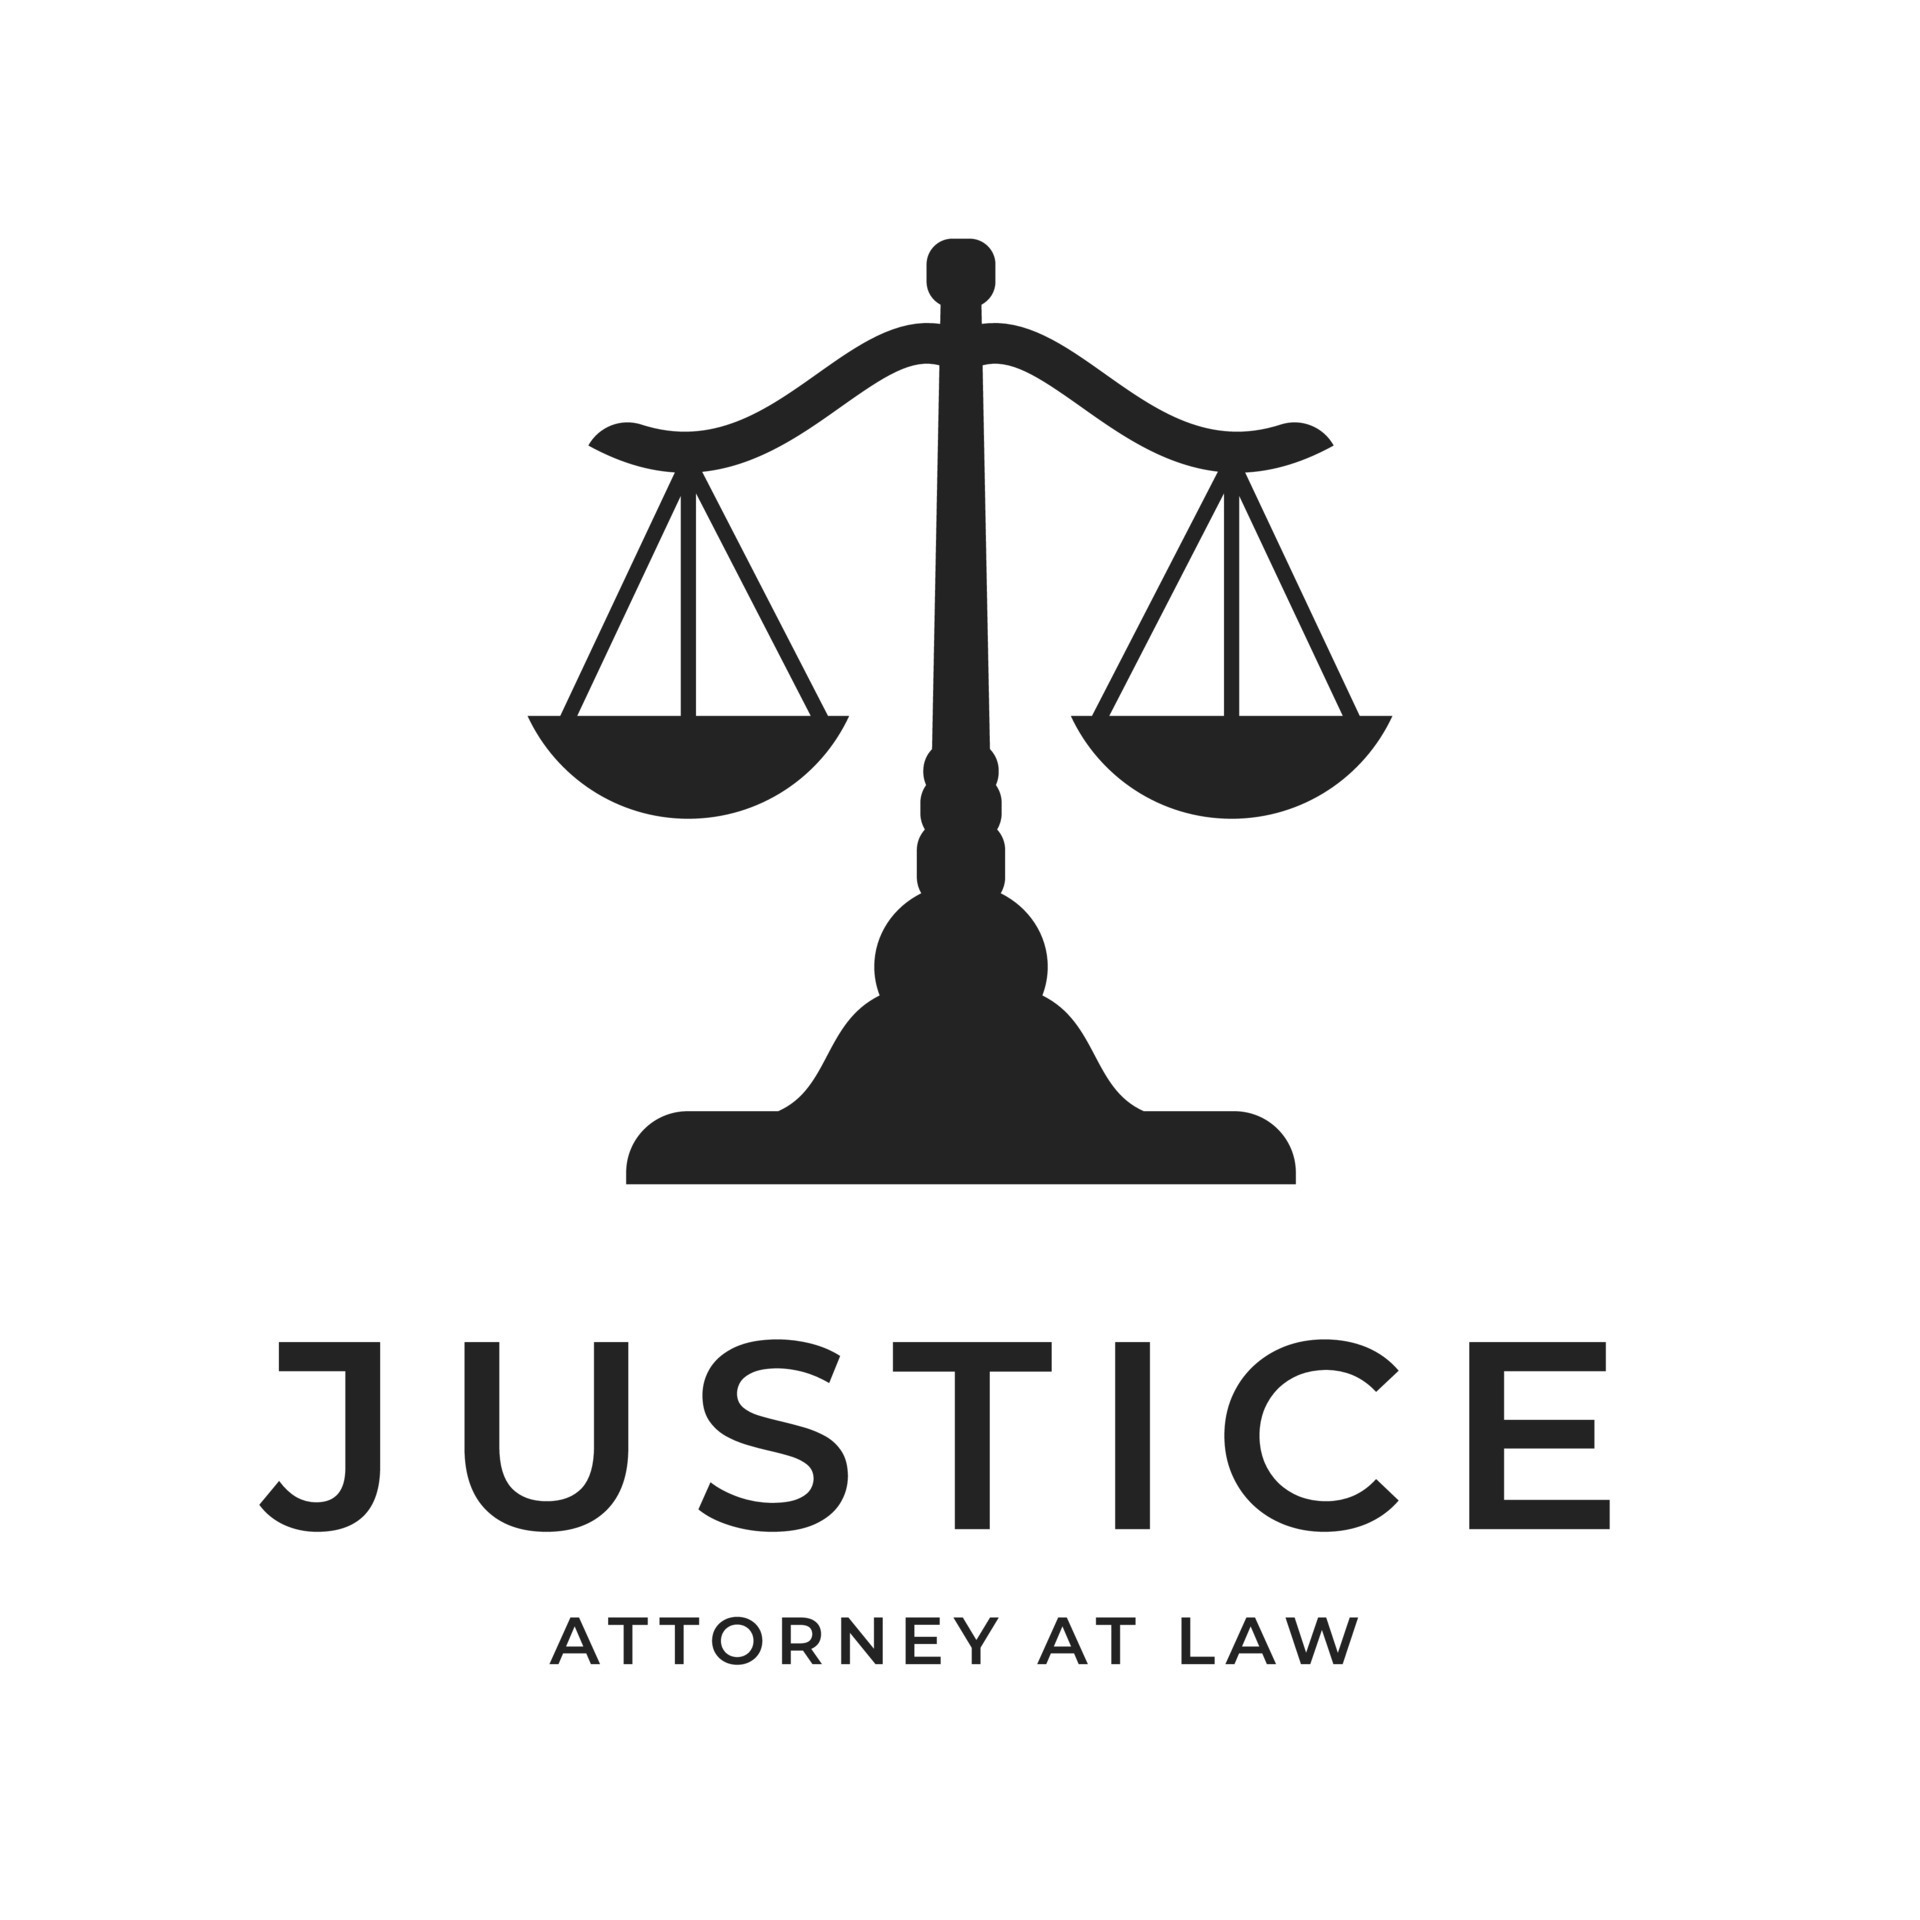 Rustic Vintage Justice Logo, the perfect logo design for your law firm ...